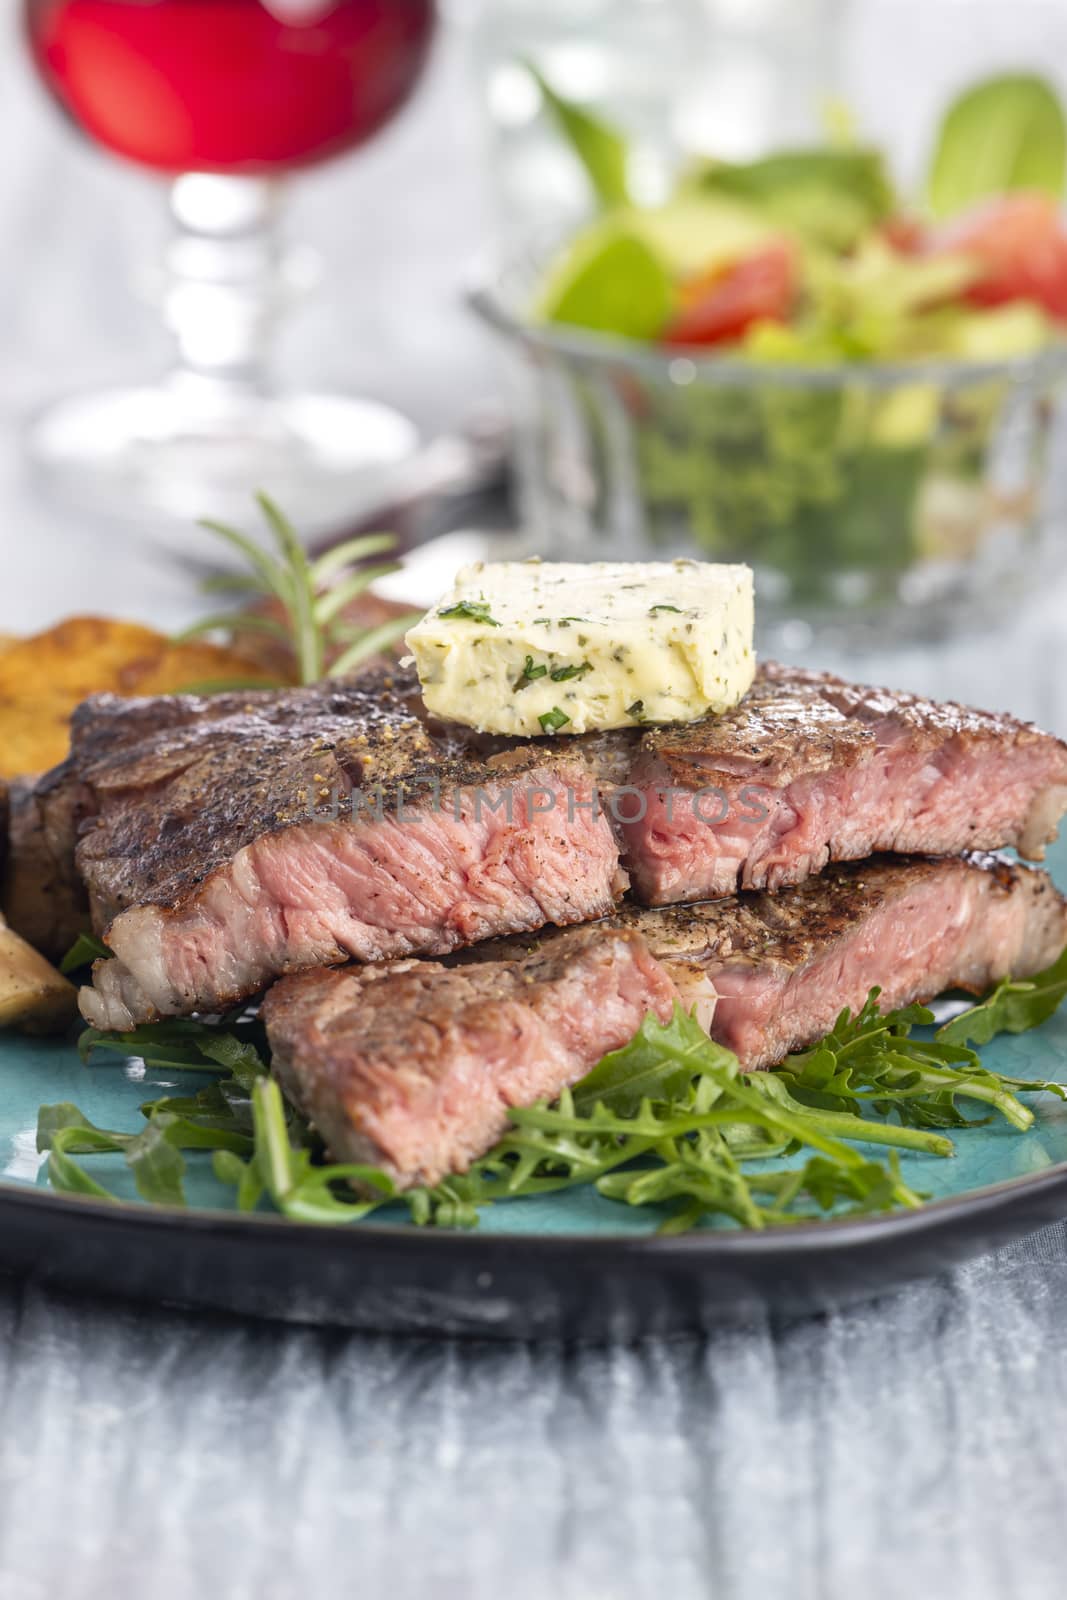 juicy grilled steak on a plate by bernjuer